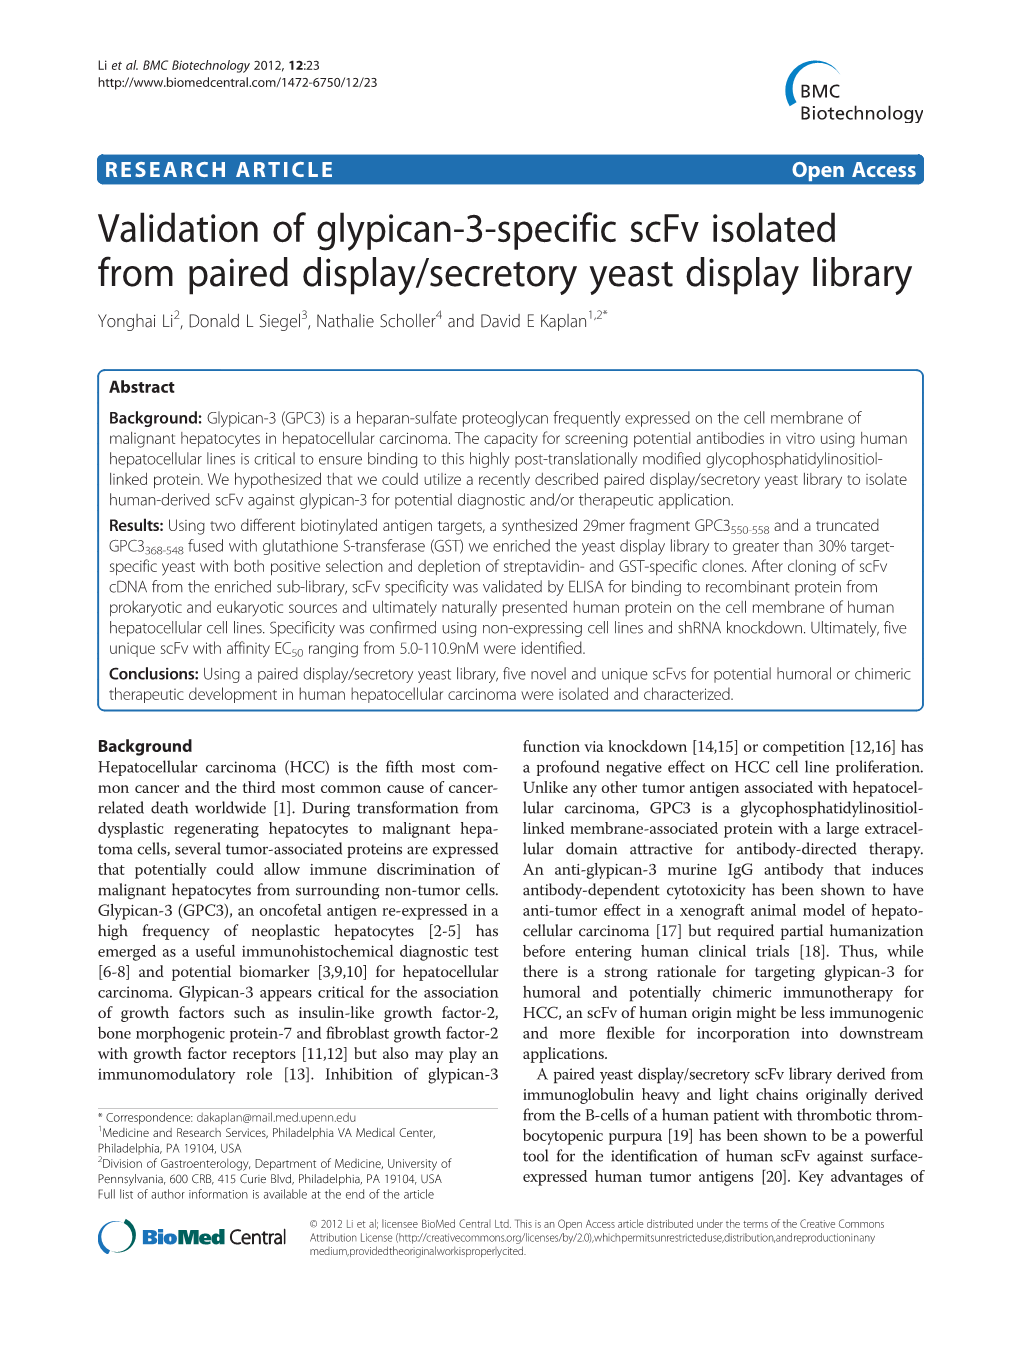 Validation of Glypican-3-Specific Scfv Isolated from Paired Display/Secretory Yeast Display Library